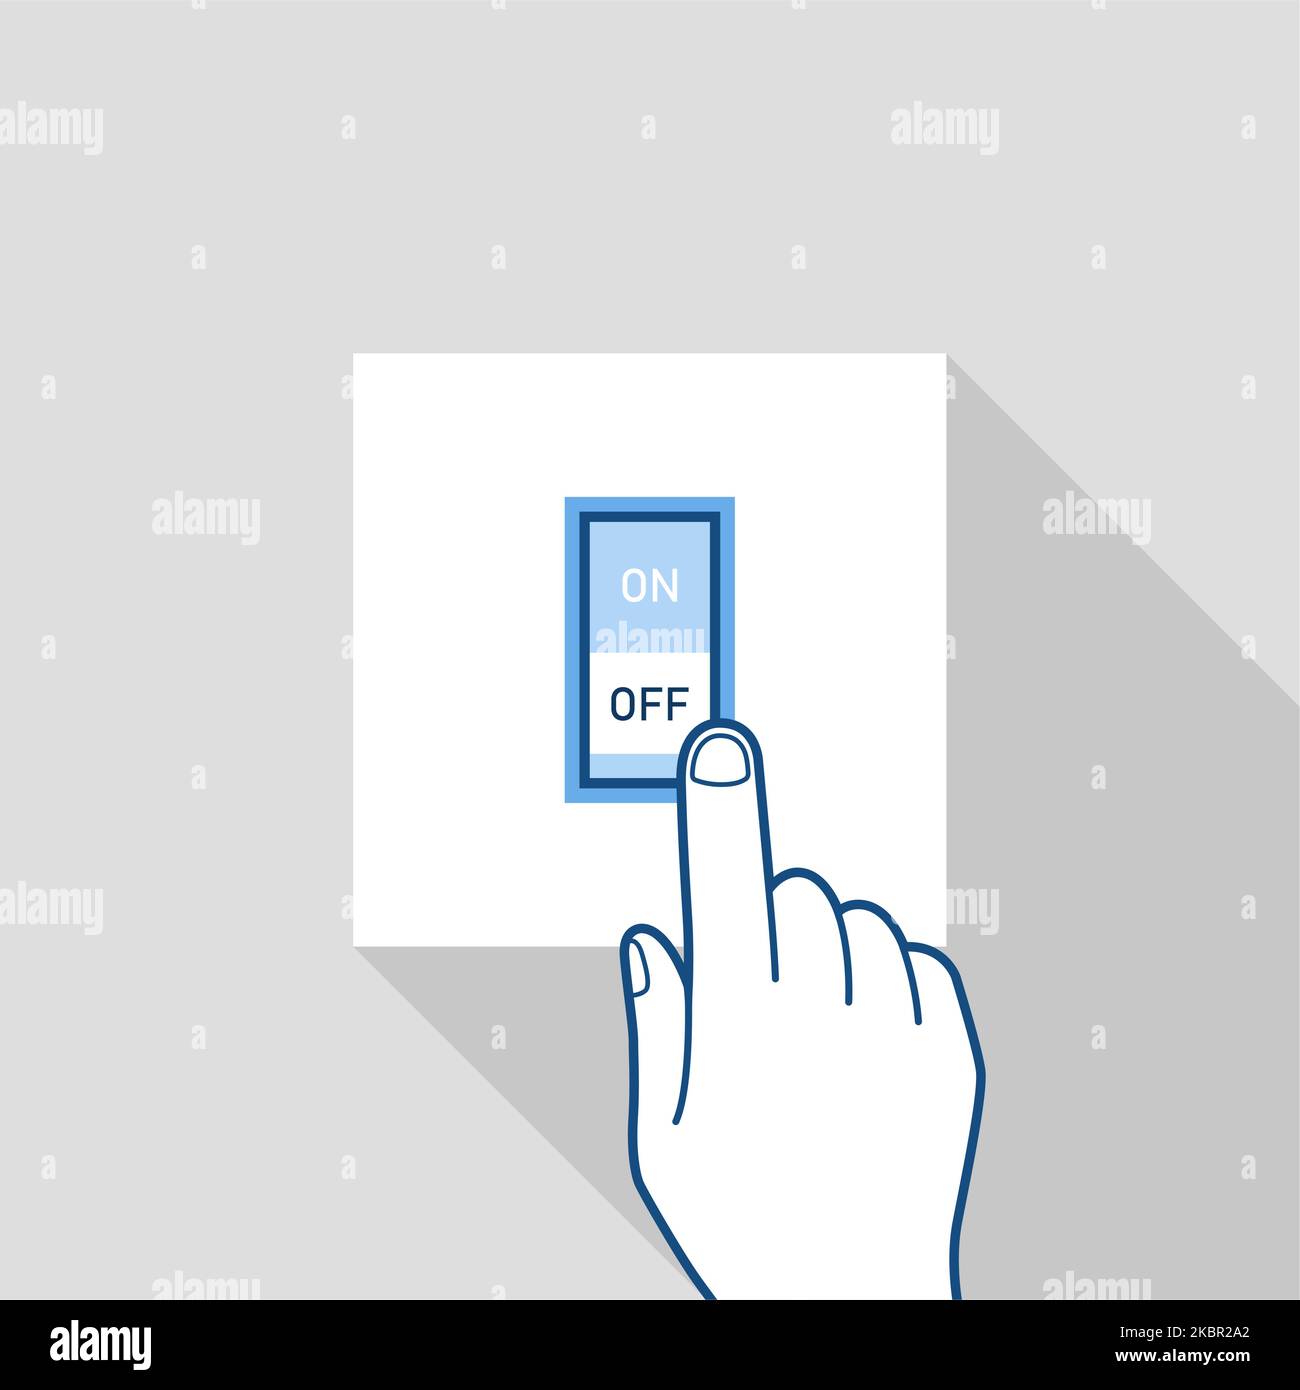 Saving energy turn off the lights, electric switch, unplug home appliances, energy efficiency, vector Stock Vector